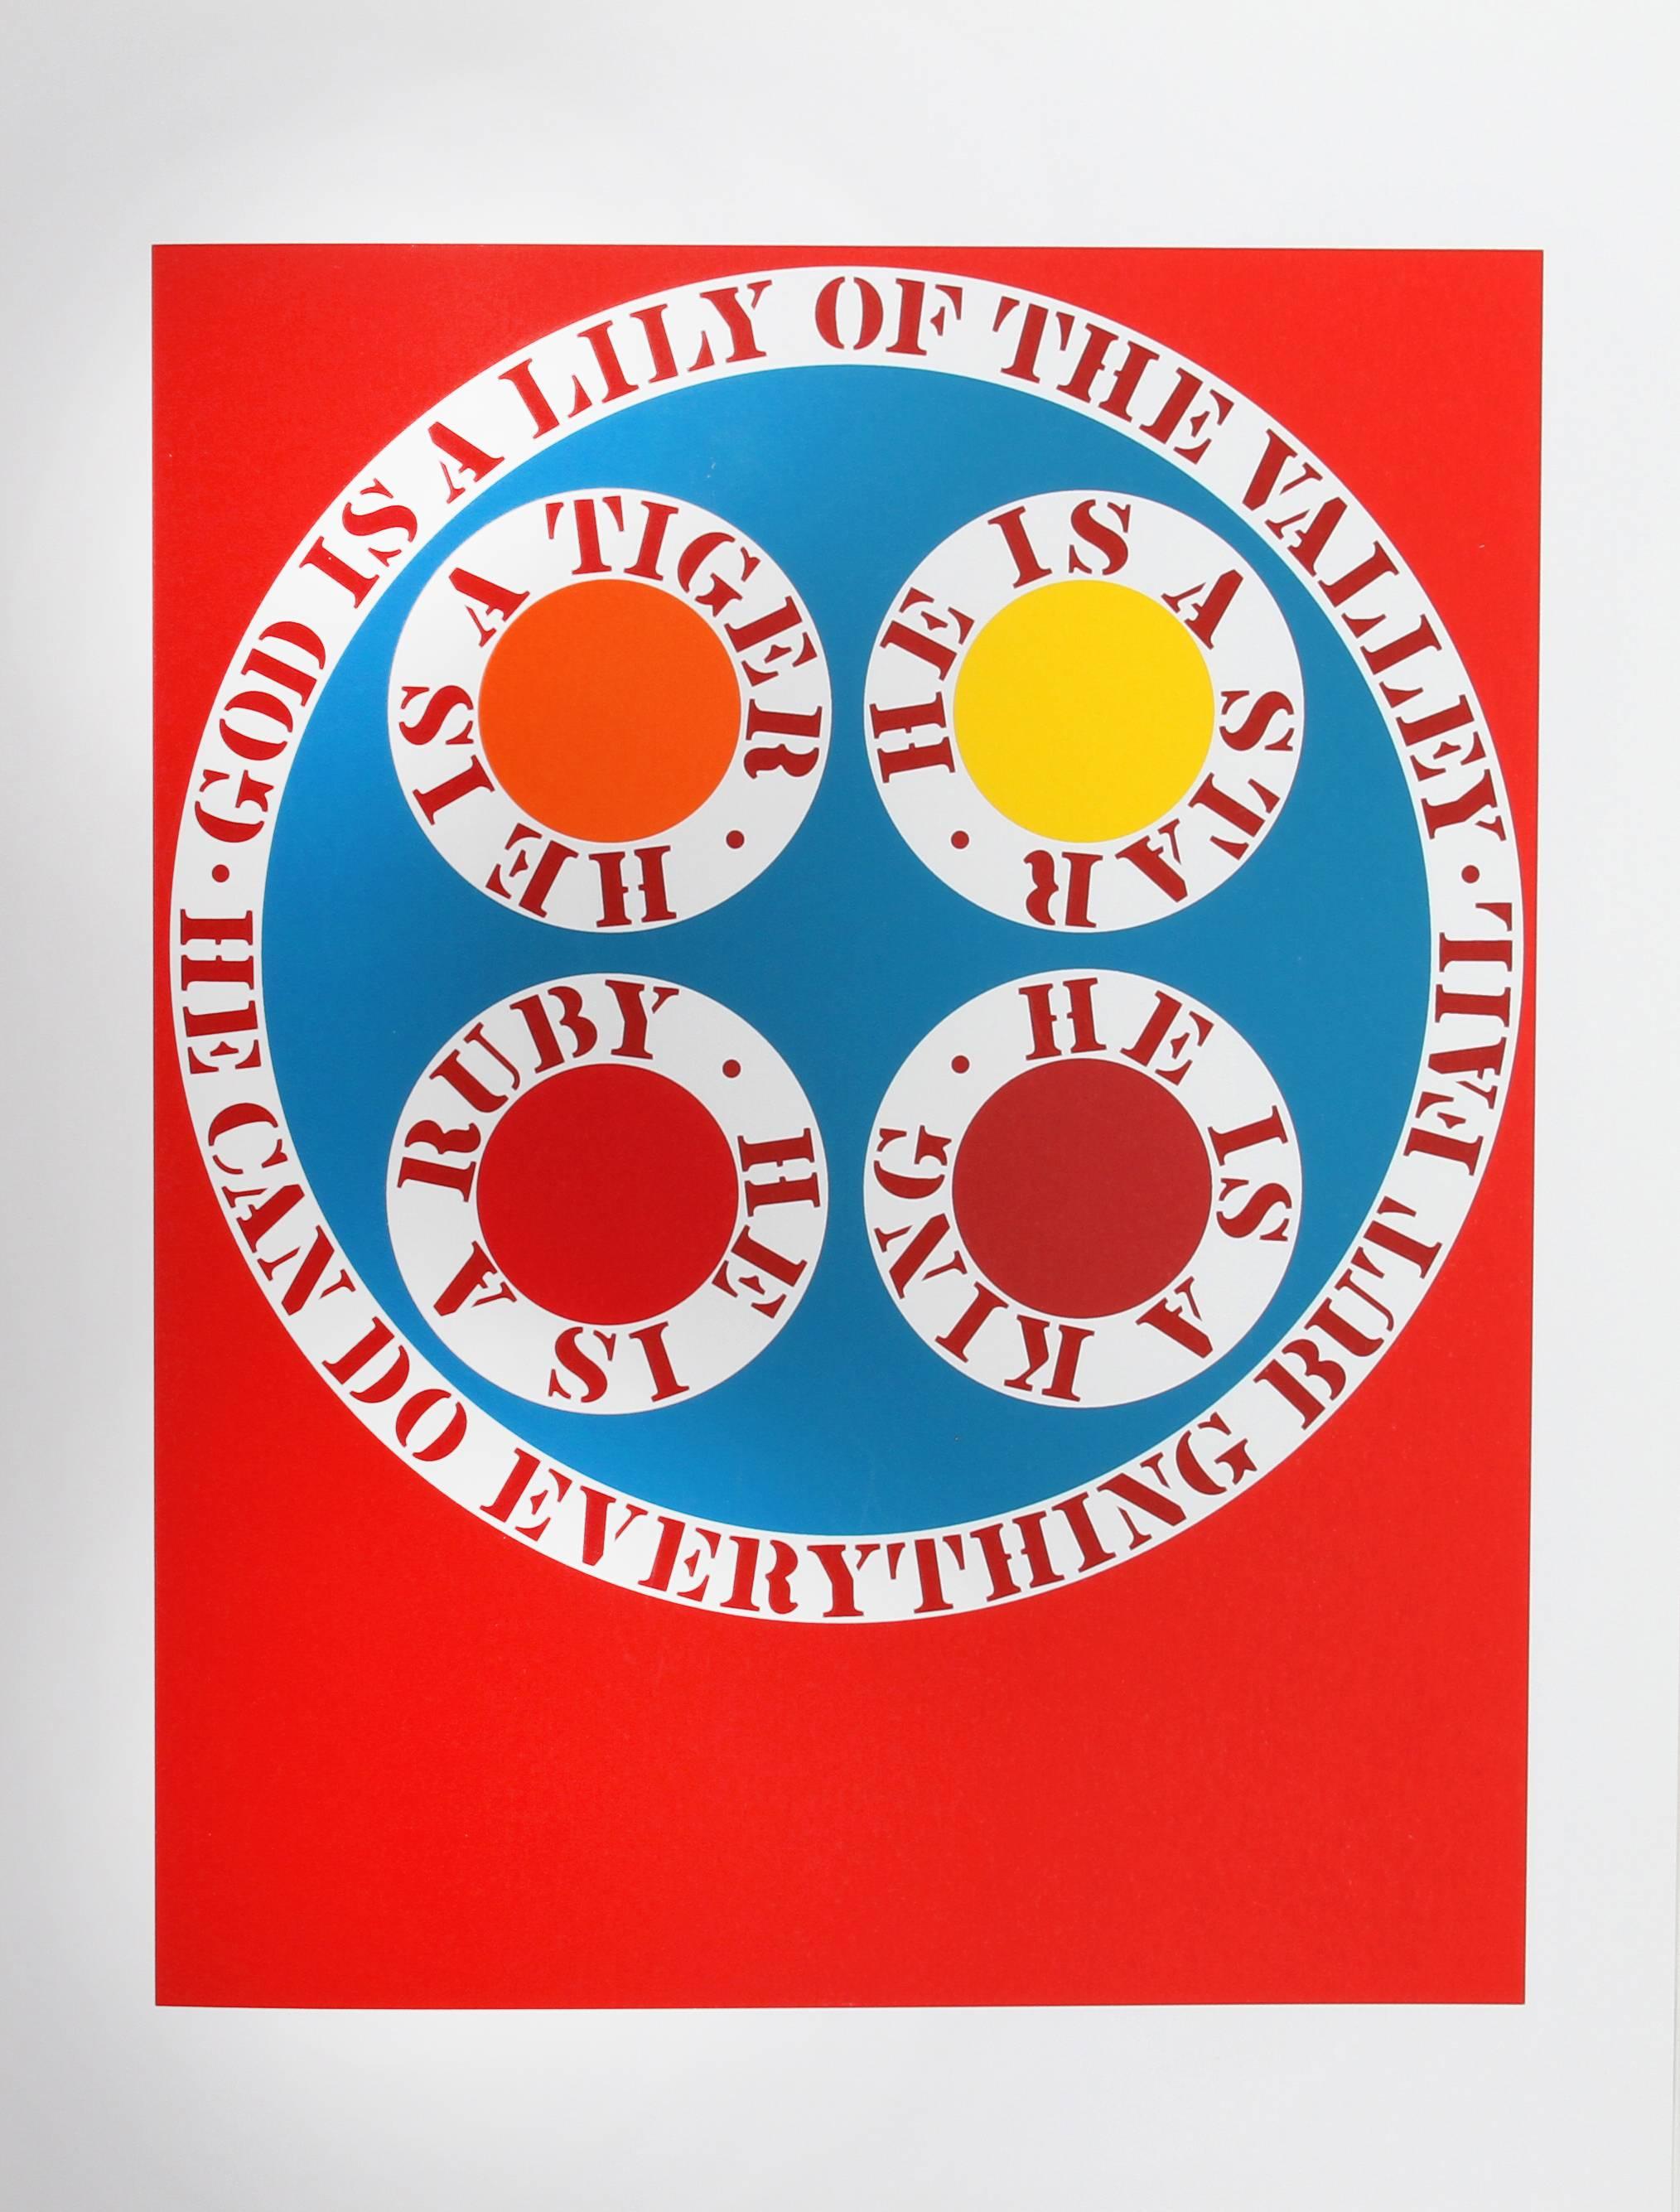 Artist: Robert Indiana, American (1928 - 2018)
Title: God is Lily of the Valley from the American Dream Portfolio
Year: 1961-62 (1997)
Medium: Serigraph
Edition: 395
Image Size: 16.75 x 13.25 inches
Size: 22 in. x 17 in. (55.88 cm x 43.18